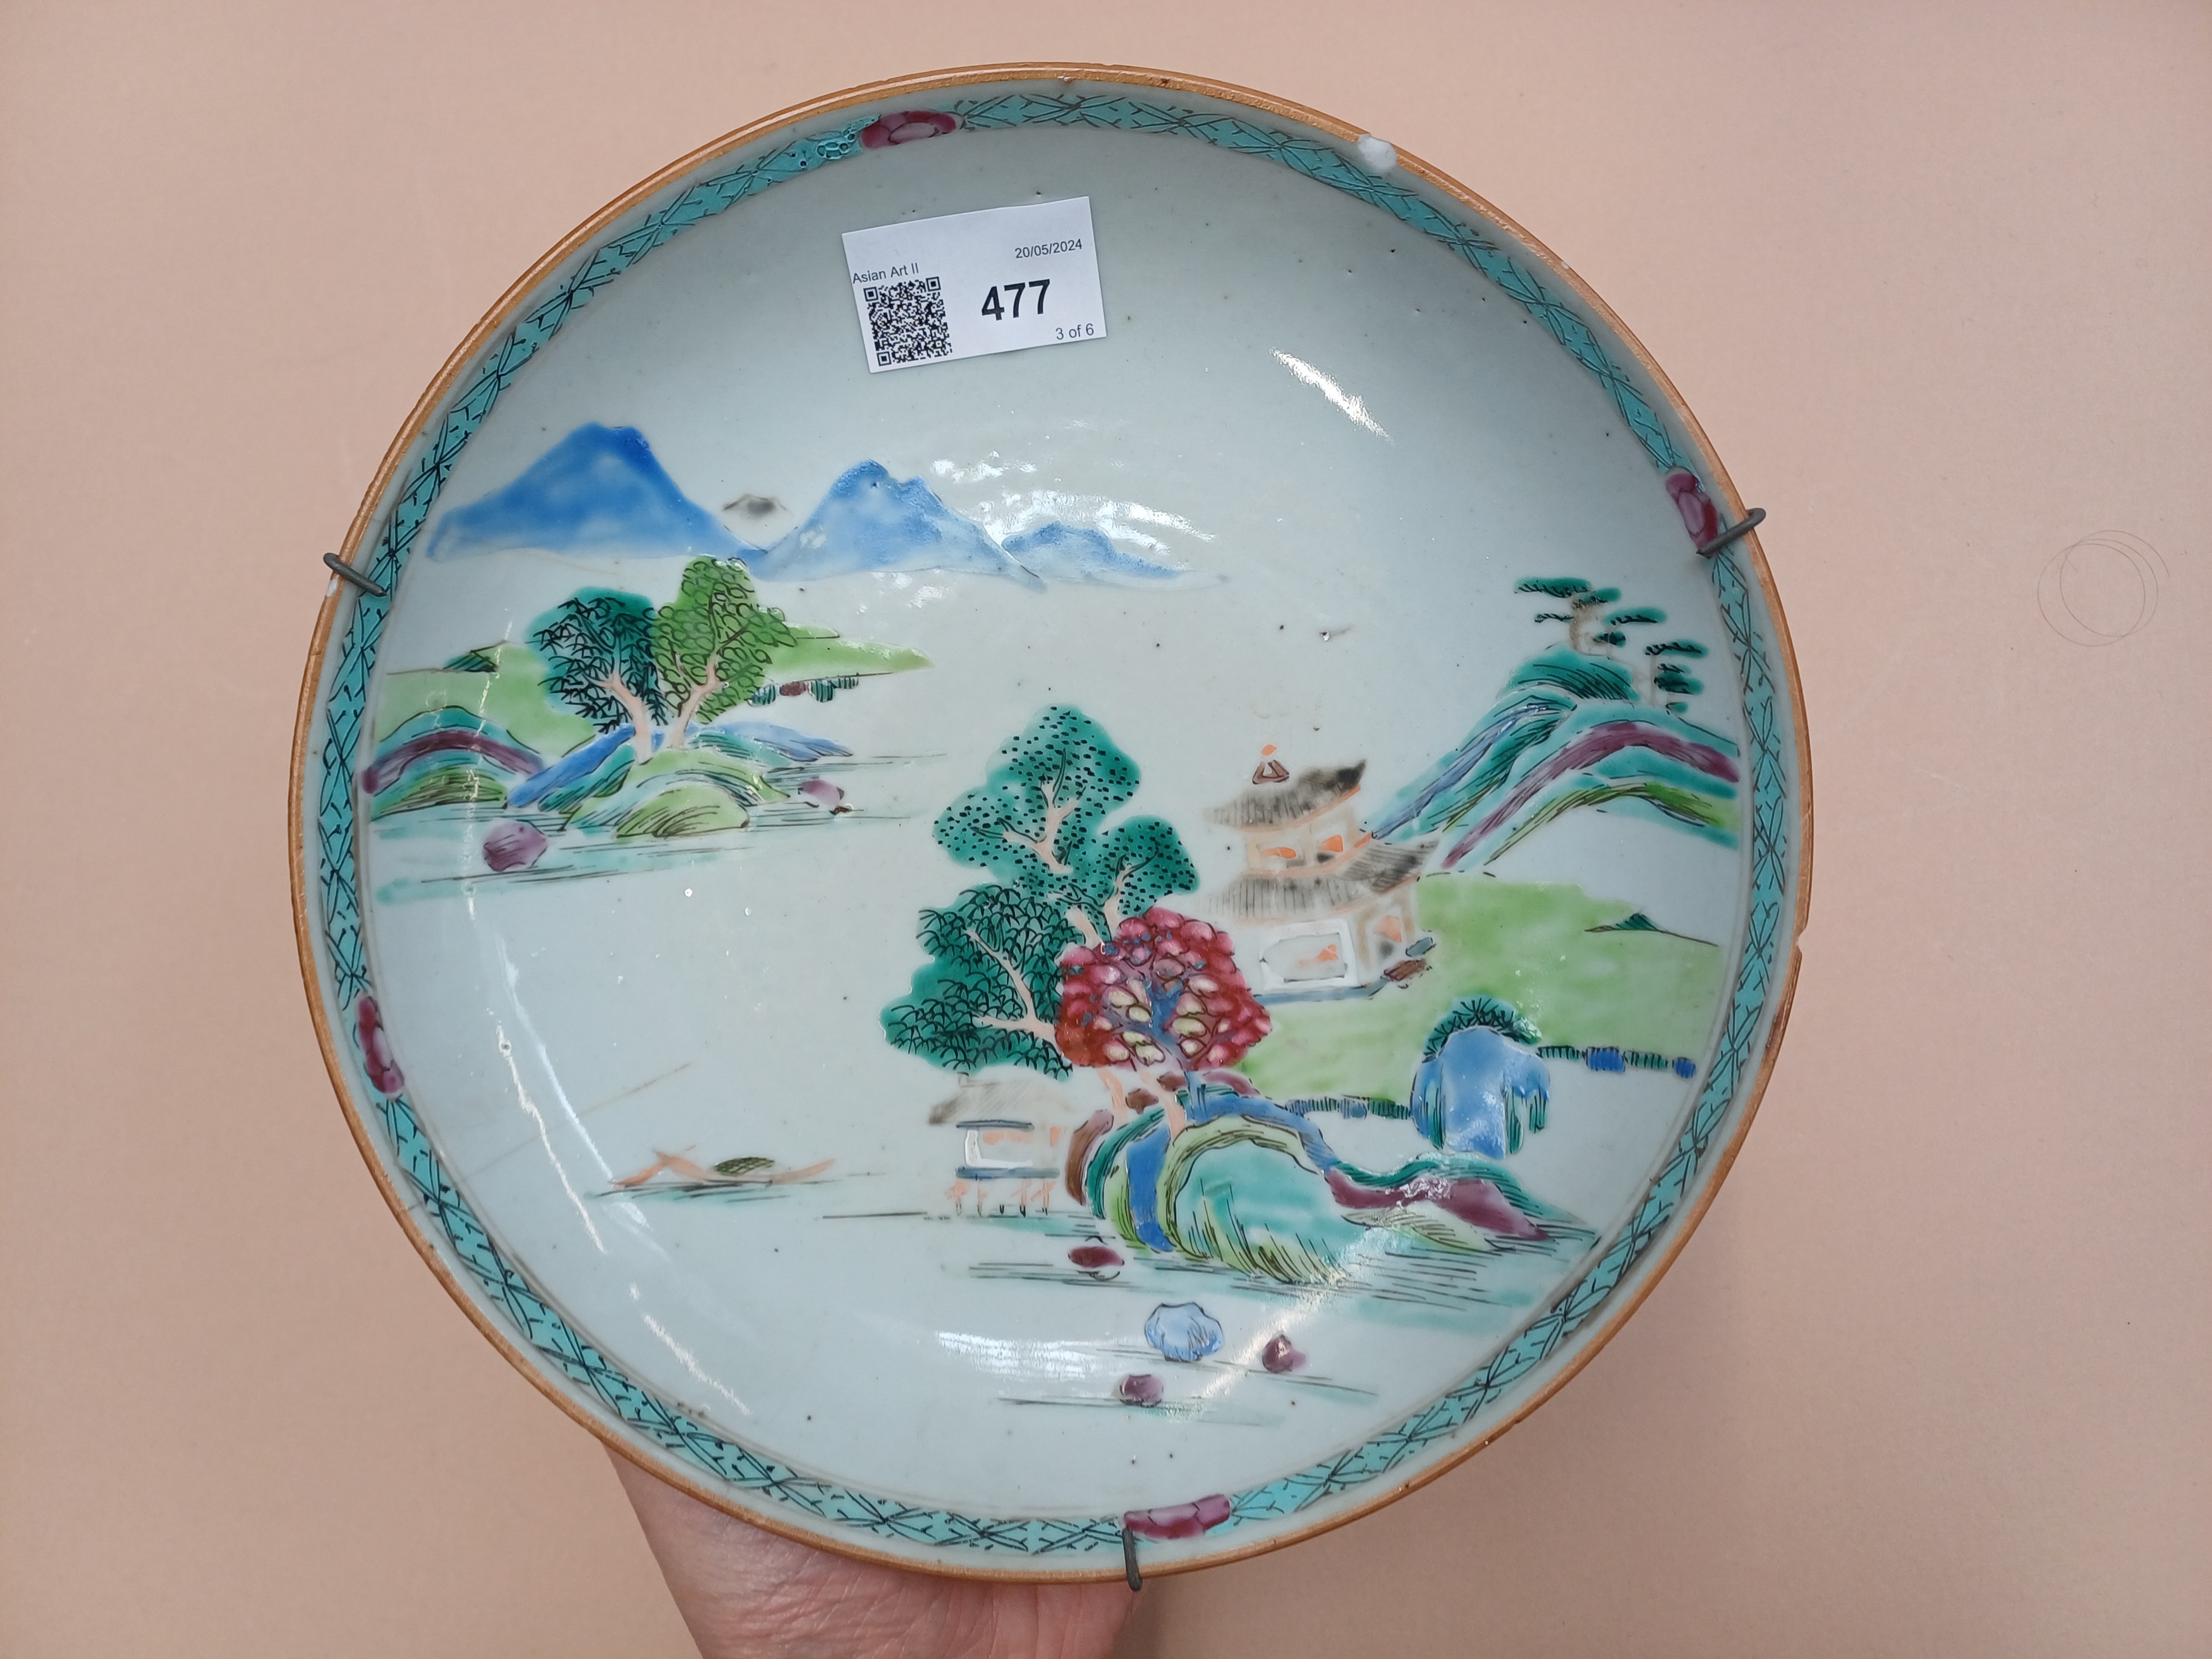 A GROUP OF CHINESE EXPORT FAMILLE-ROSE PORCELAIN 清十八至二十世紀 外銷粉彩瓷器一組 - Image 10 of 22